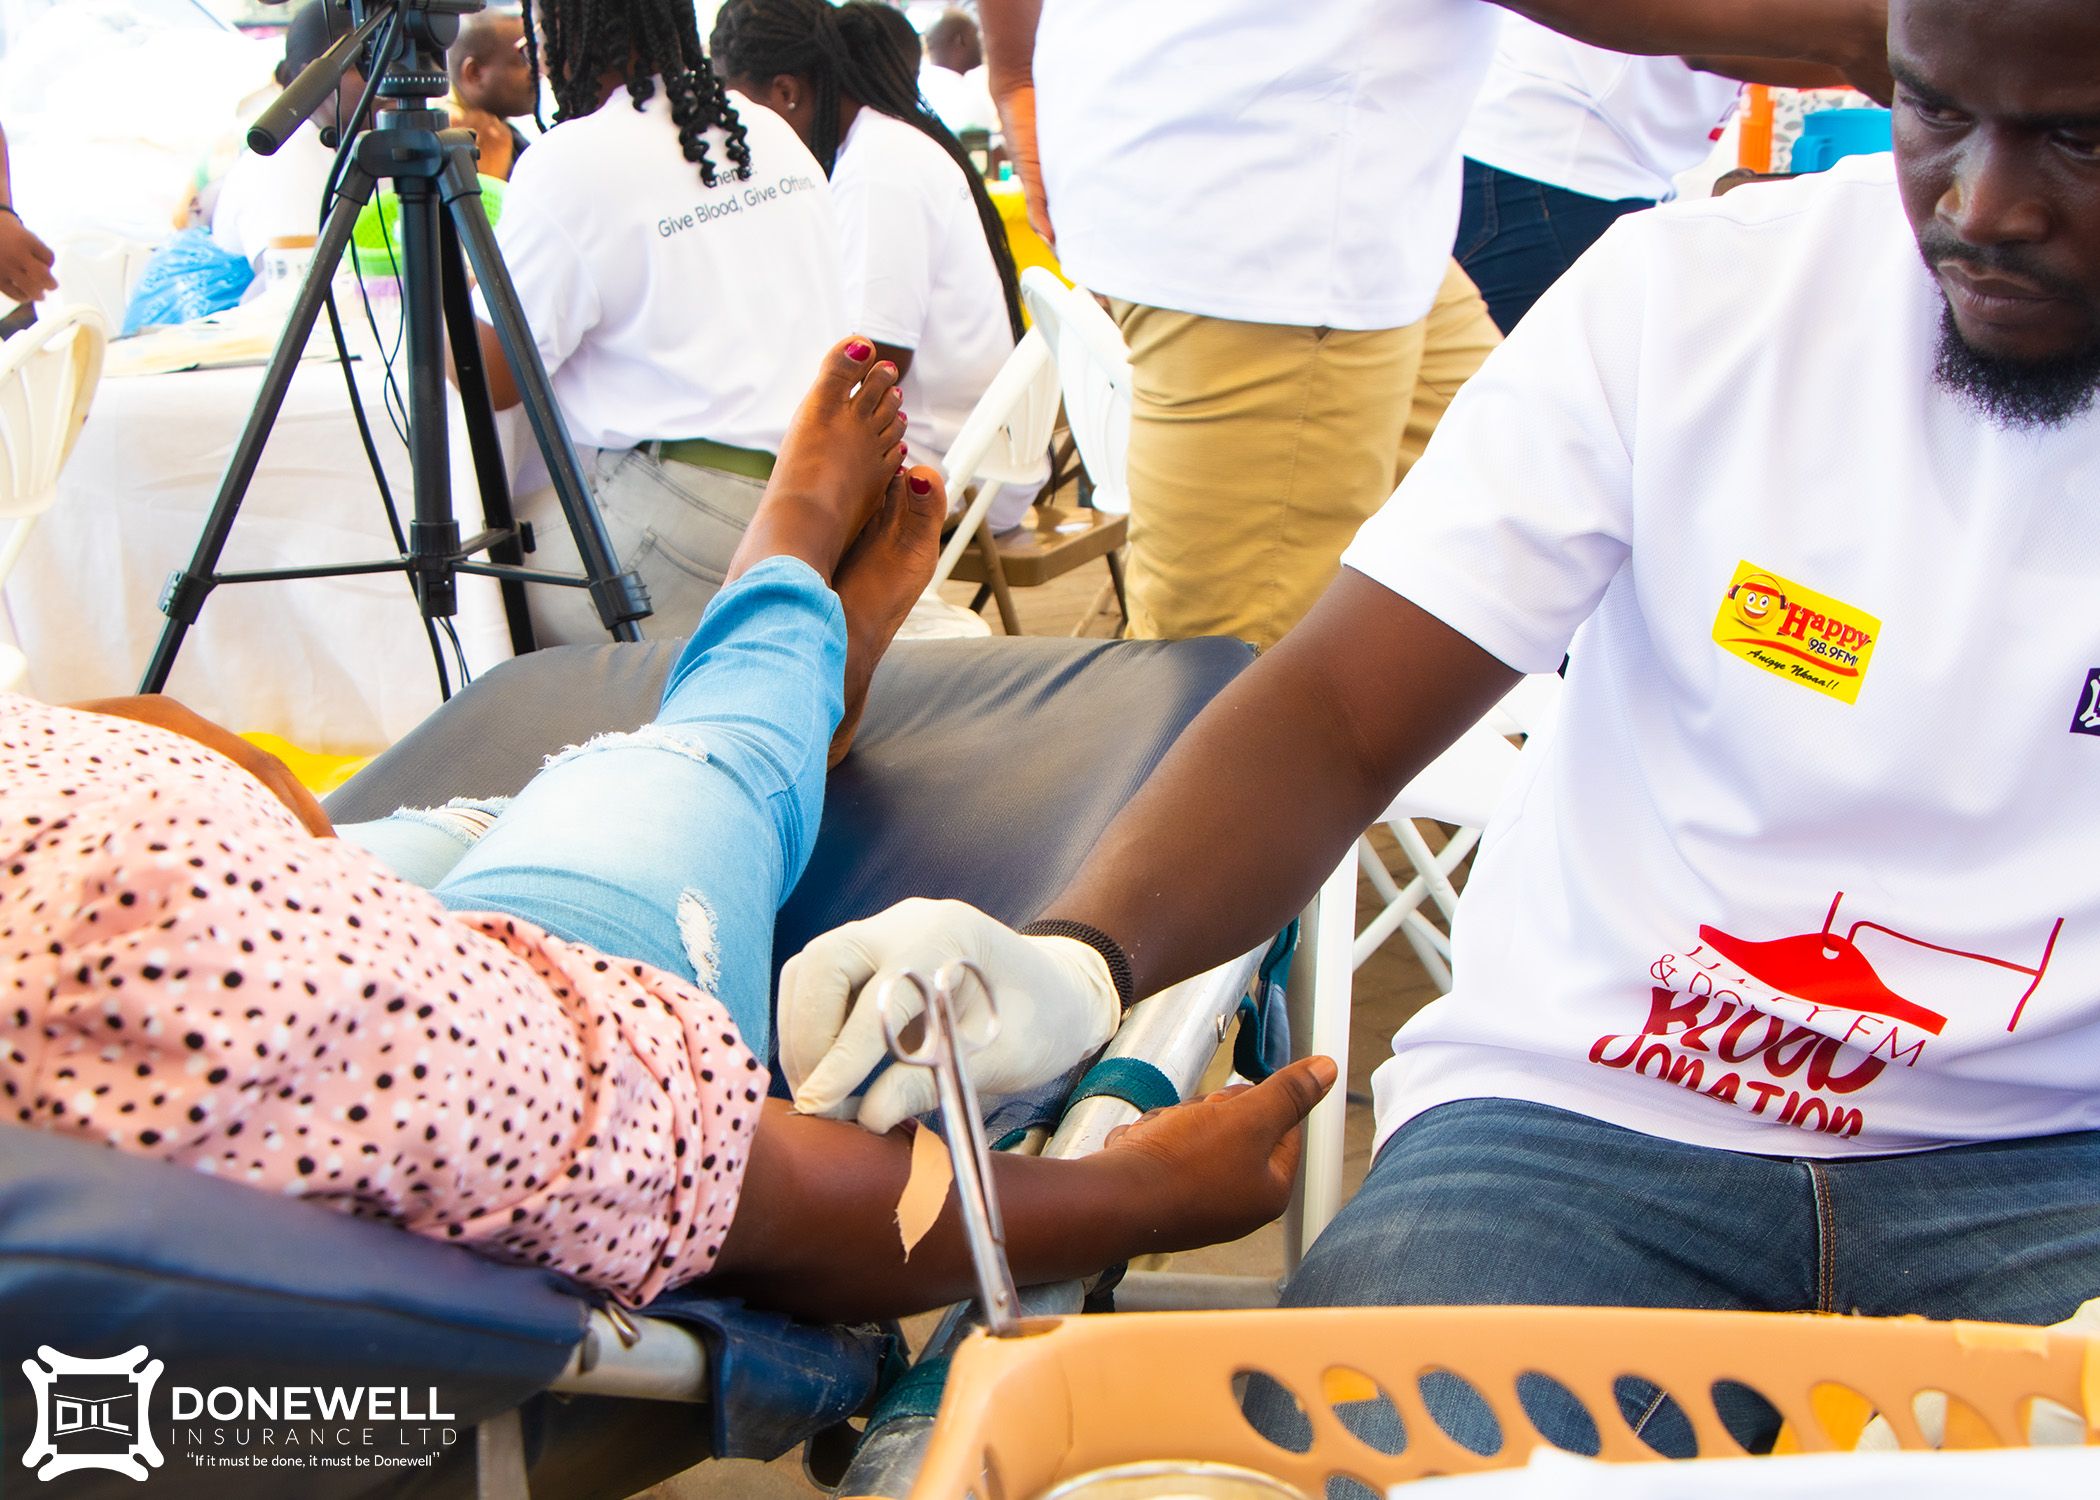 2023 BLOOD DONATION EXERCISE images